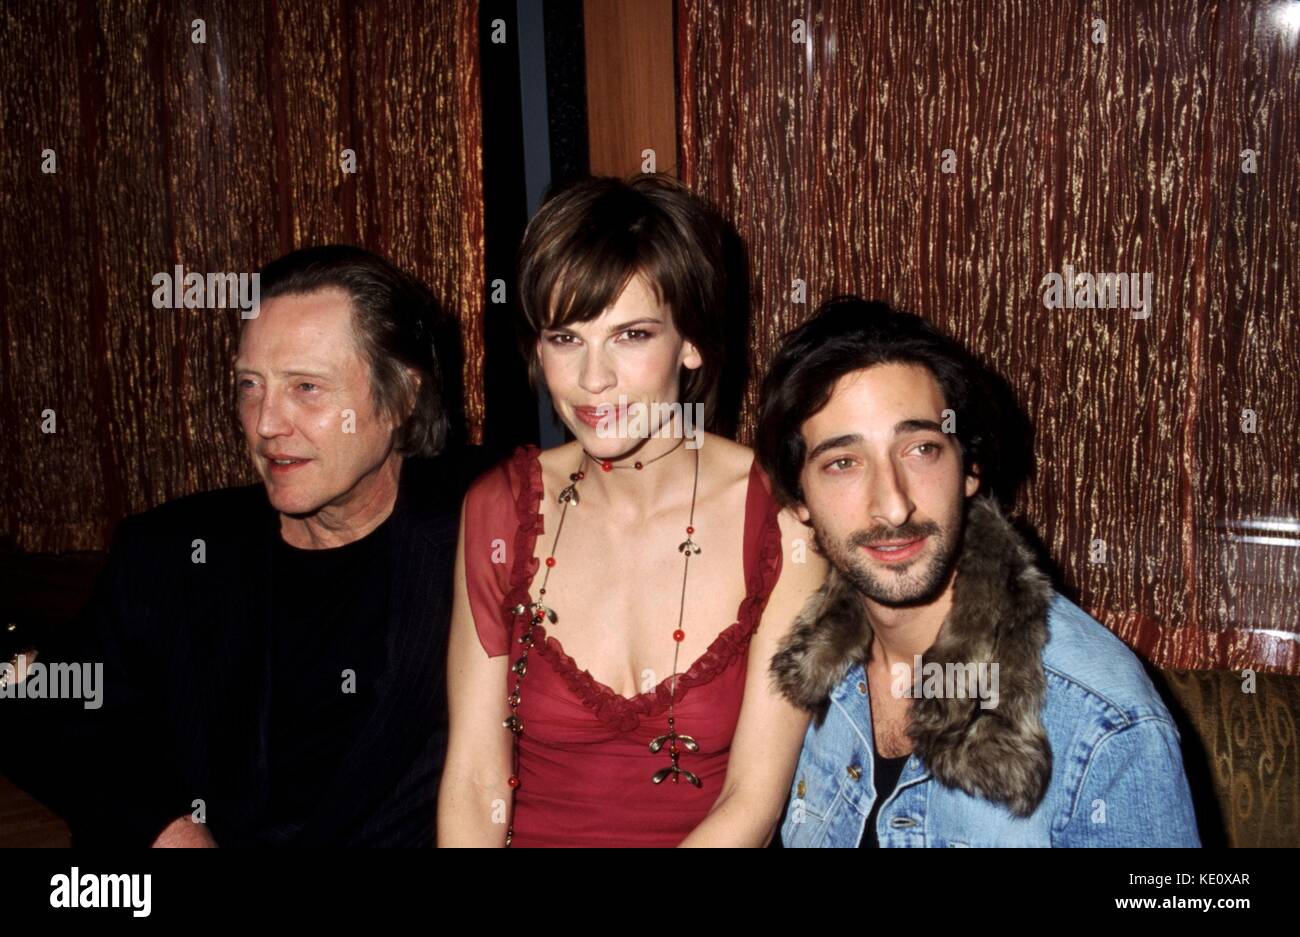 Christopher Walken, Hilary Swank and Adrien Brody Private Screening of 'The Affair of the Necklace' Tribeca Grand Hotel, NYC 11/27/01 ©Joe Marzullo /MediaPunch Hilary is wearing a Christian Dior dress Stock Photo